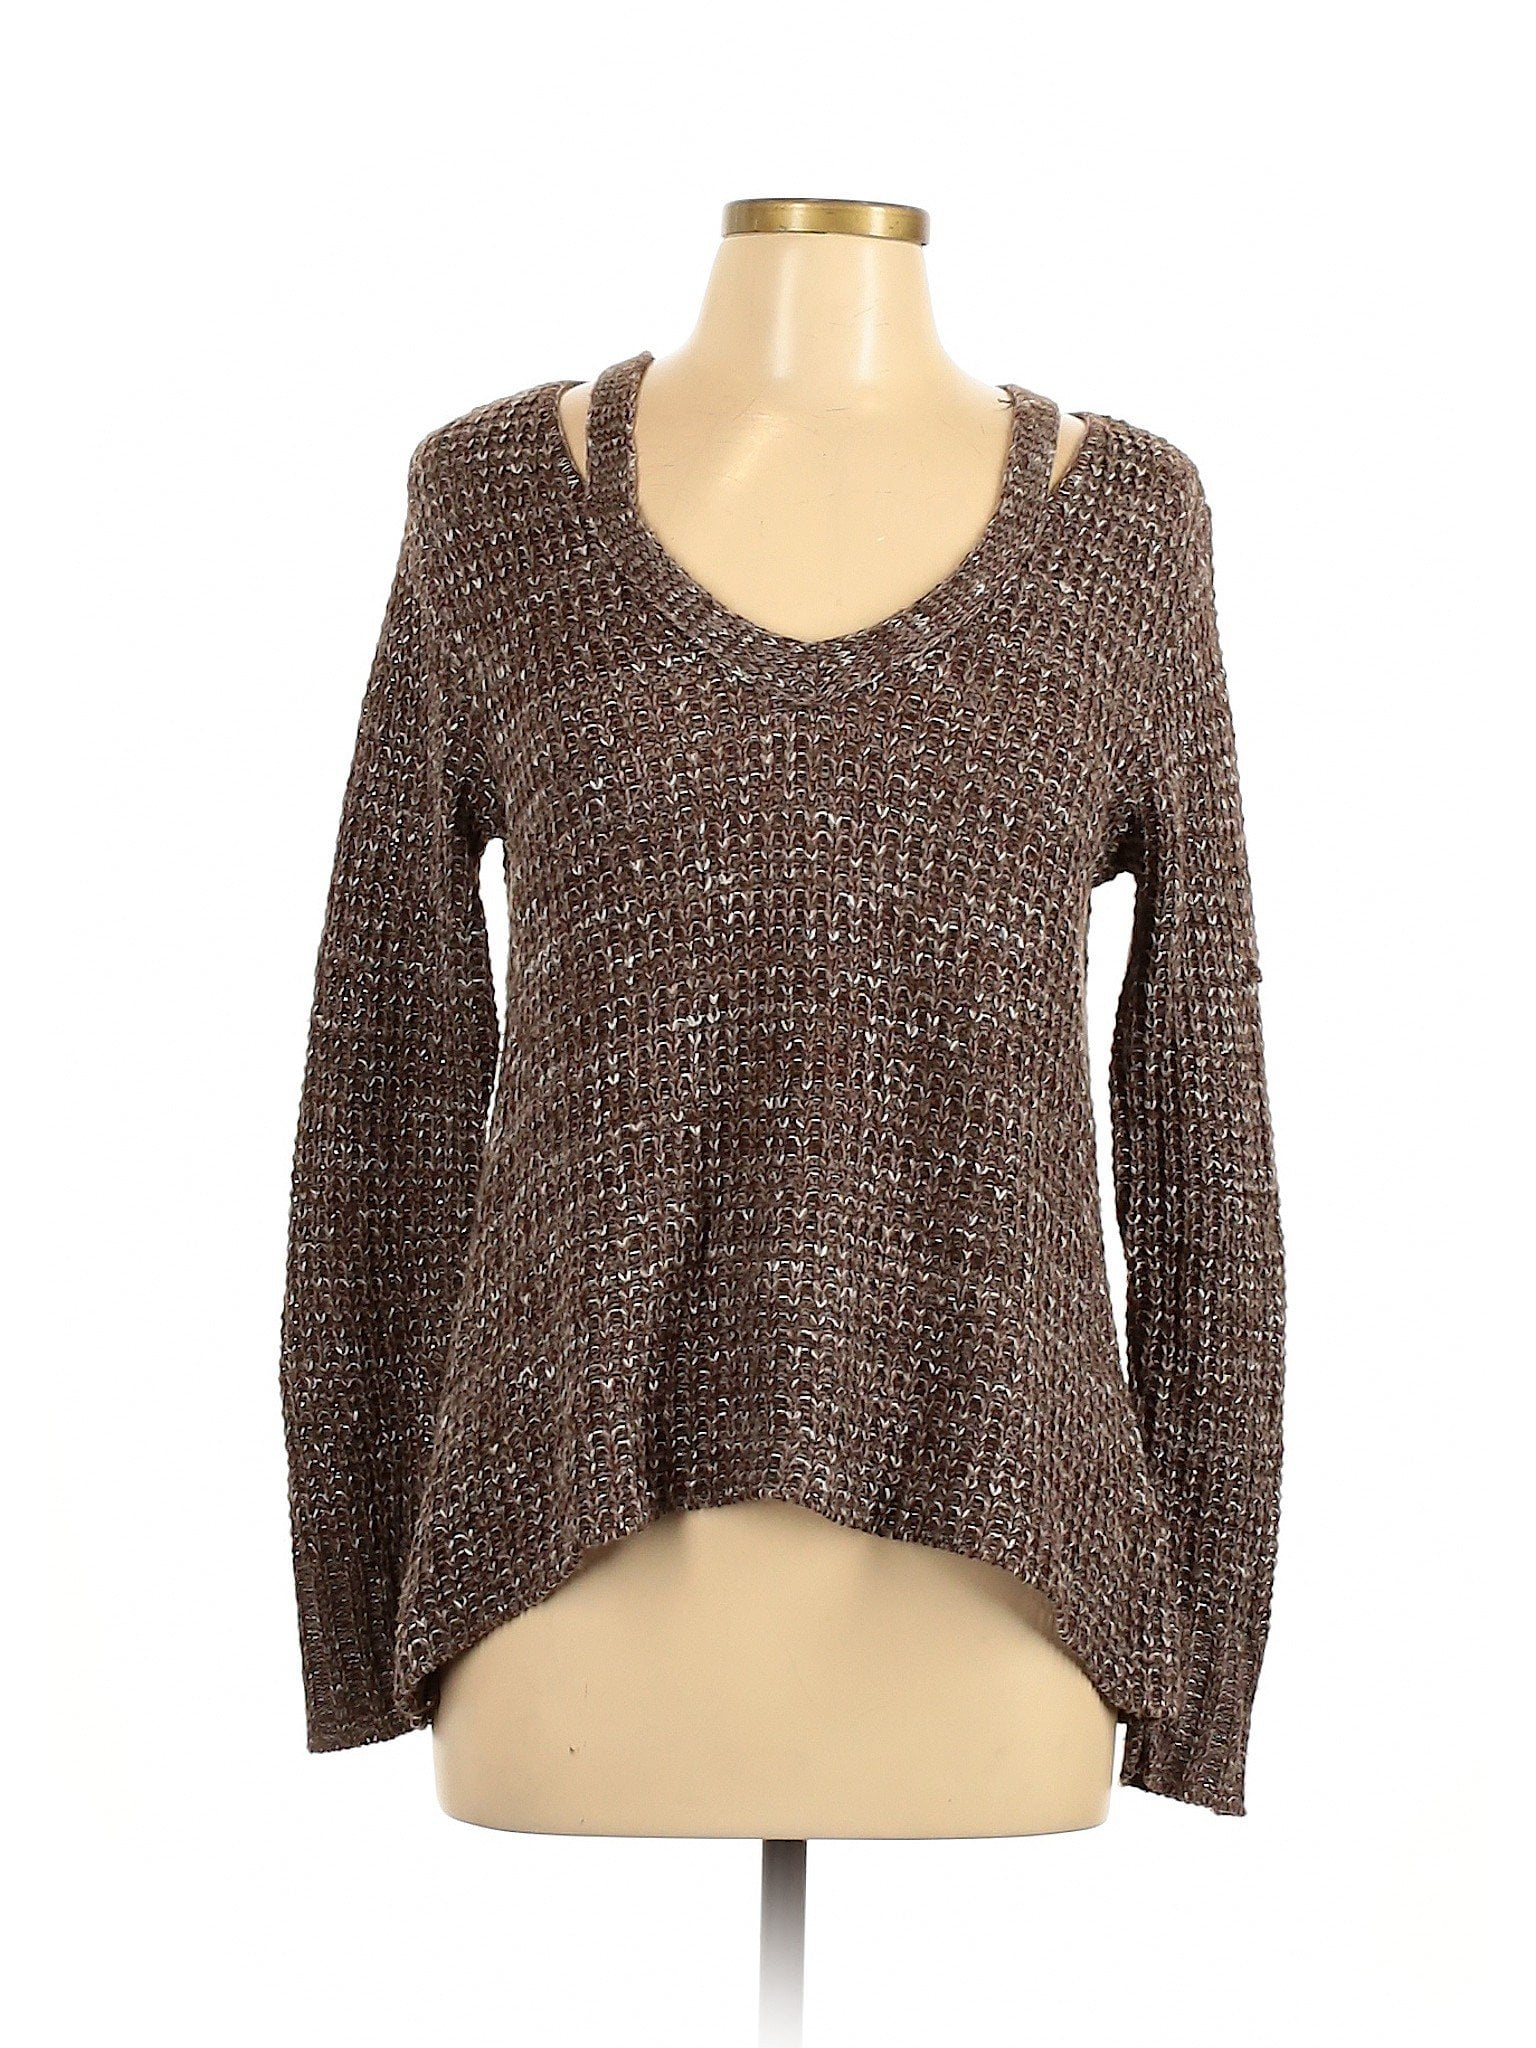 American Eagle Outfitters Nude Zip Sweater/Pullover Size 